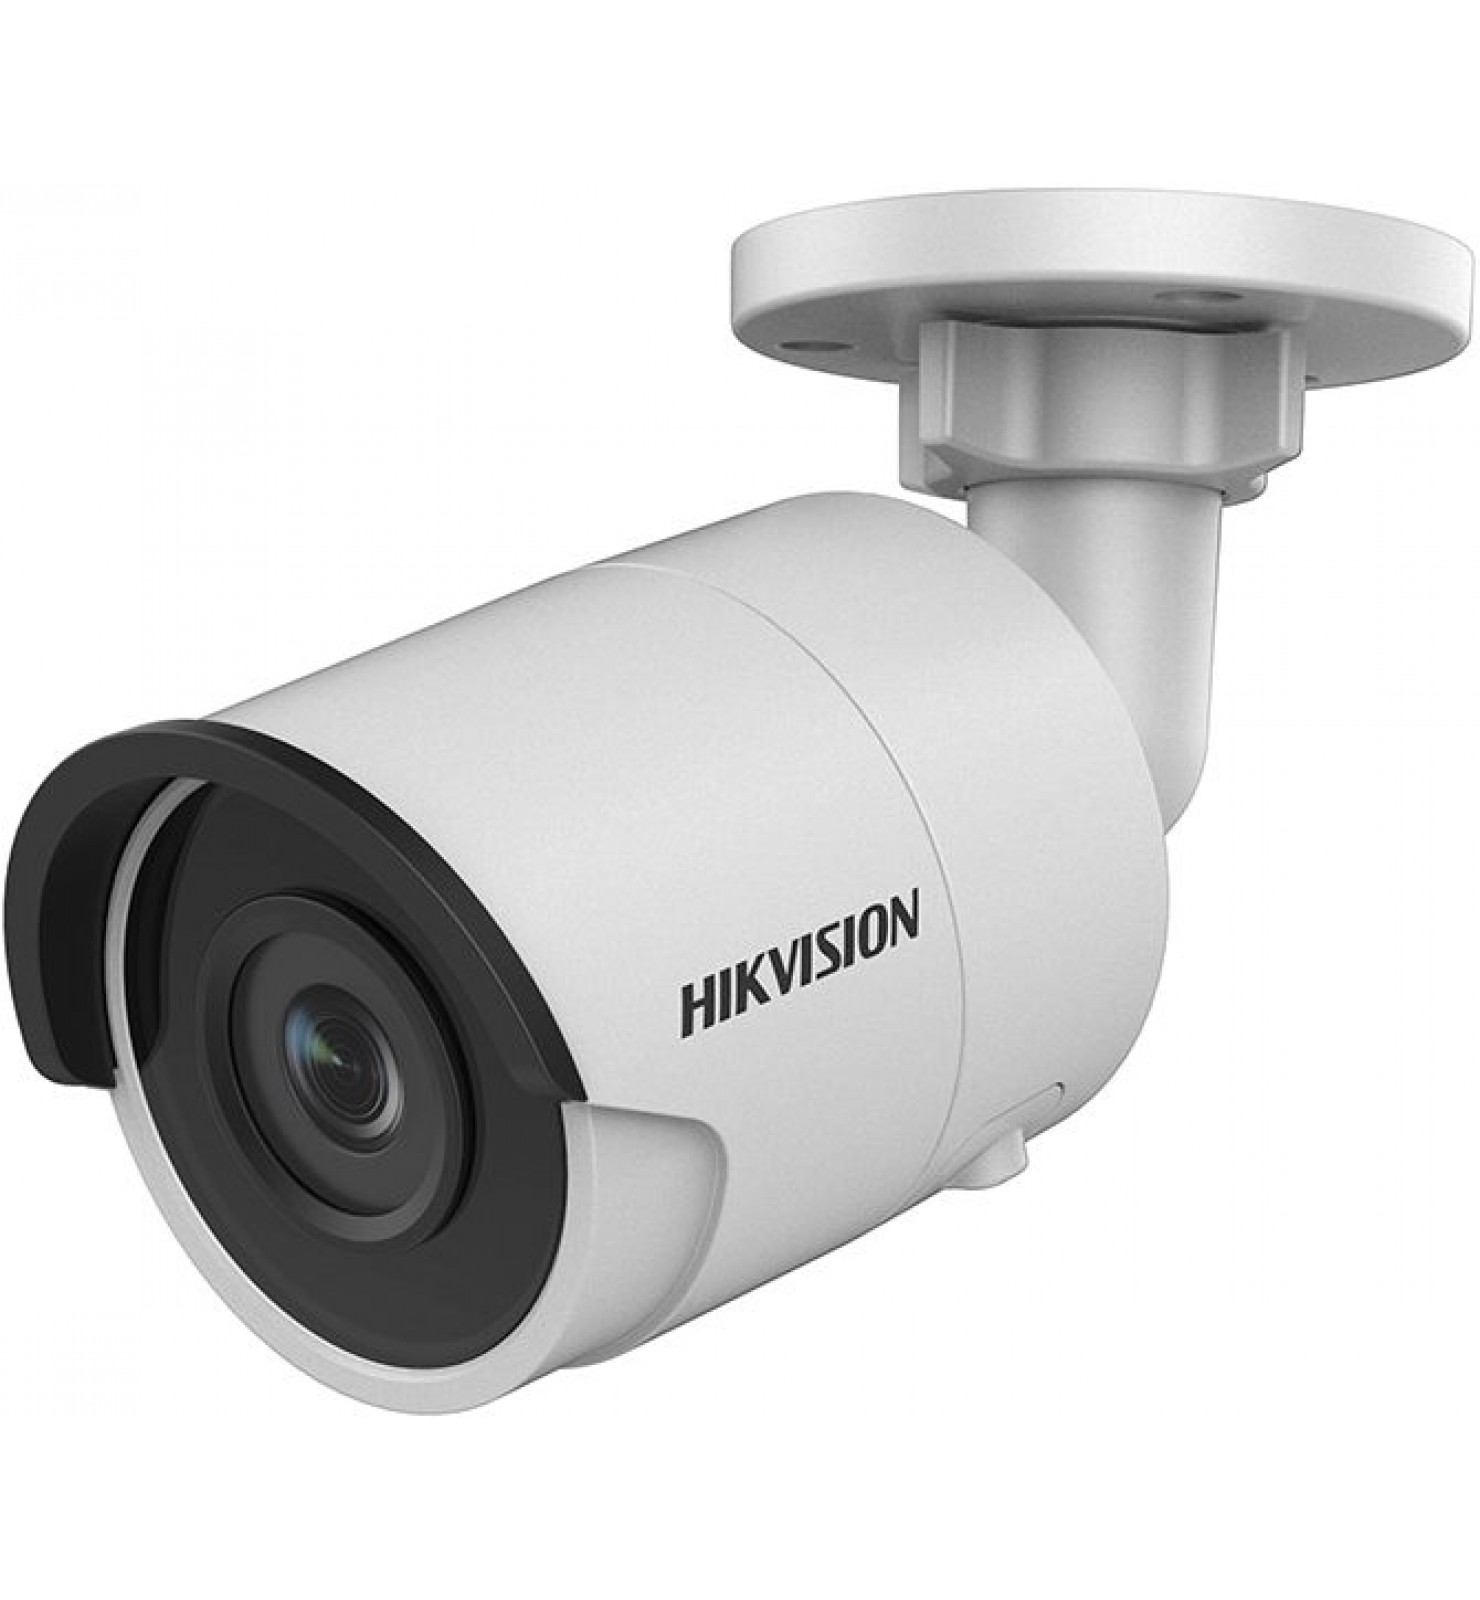 Камера Hikvision DS-2CD2023G0-I